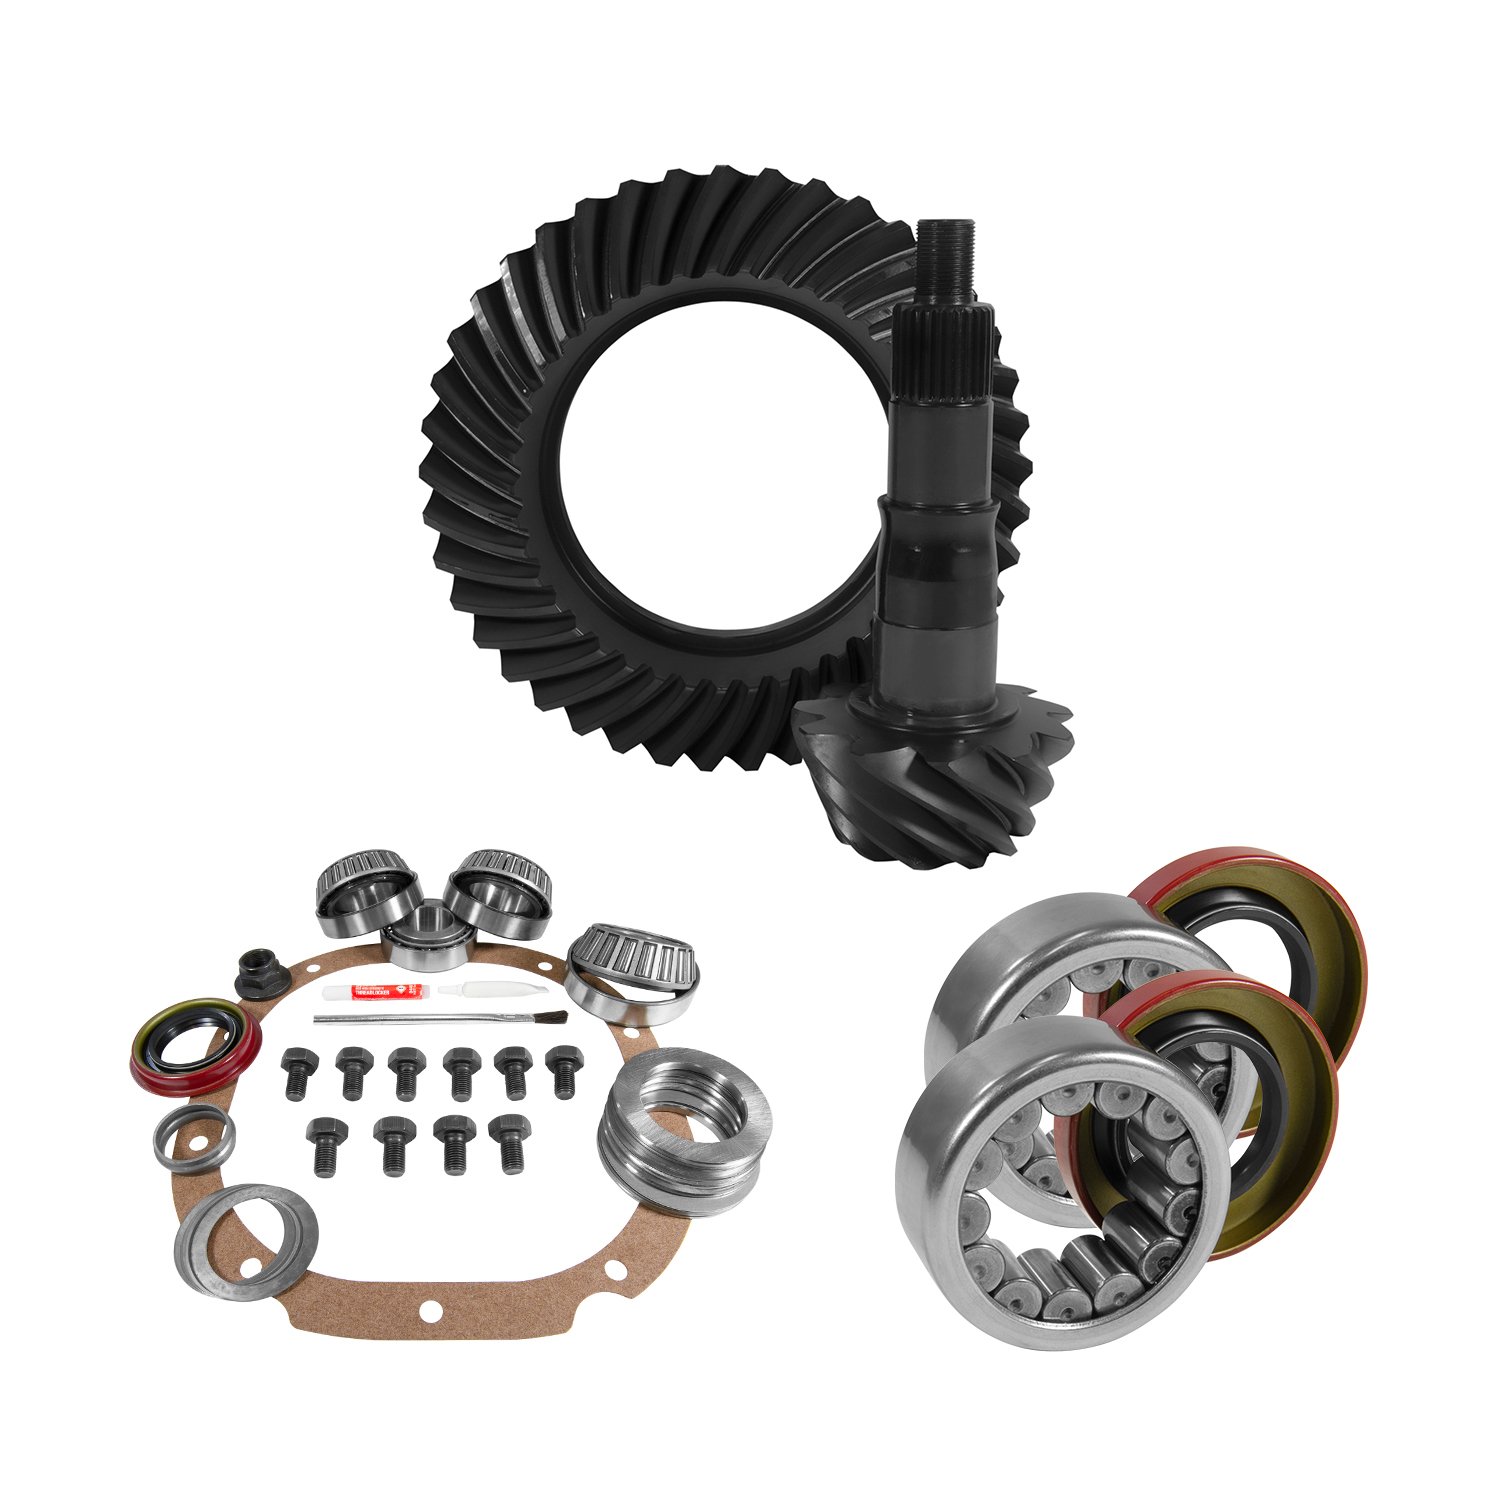 USA Standard 10769 8.8 in. Ford 4.56 Rear Ring & Pinion Install Kit, 2.99 in. Od Axle Bearings & Seals